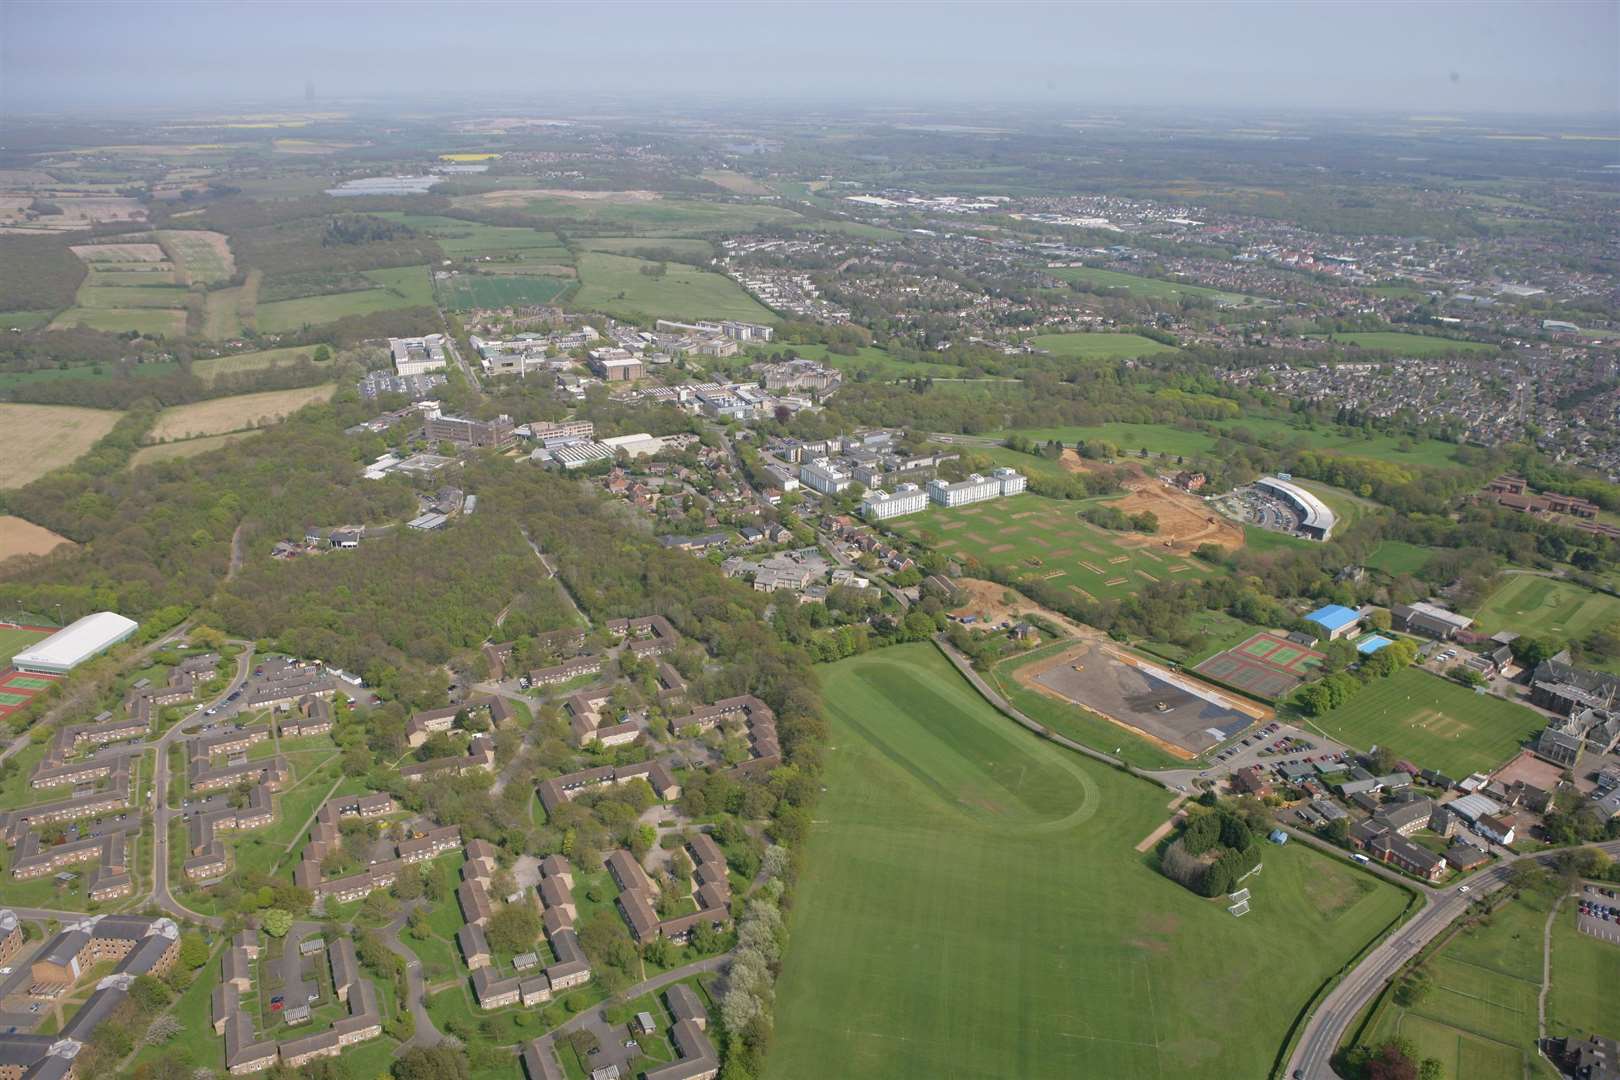 Land surrounding the University of Kent’s campus has been put forward for housing development